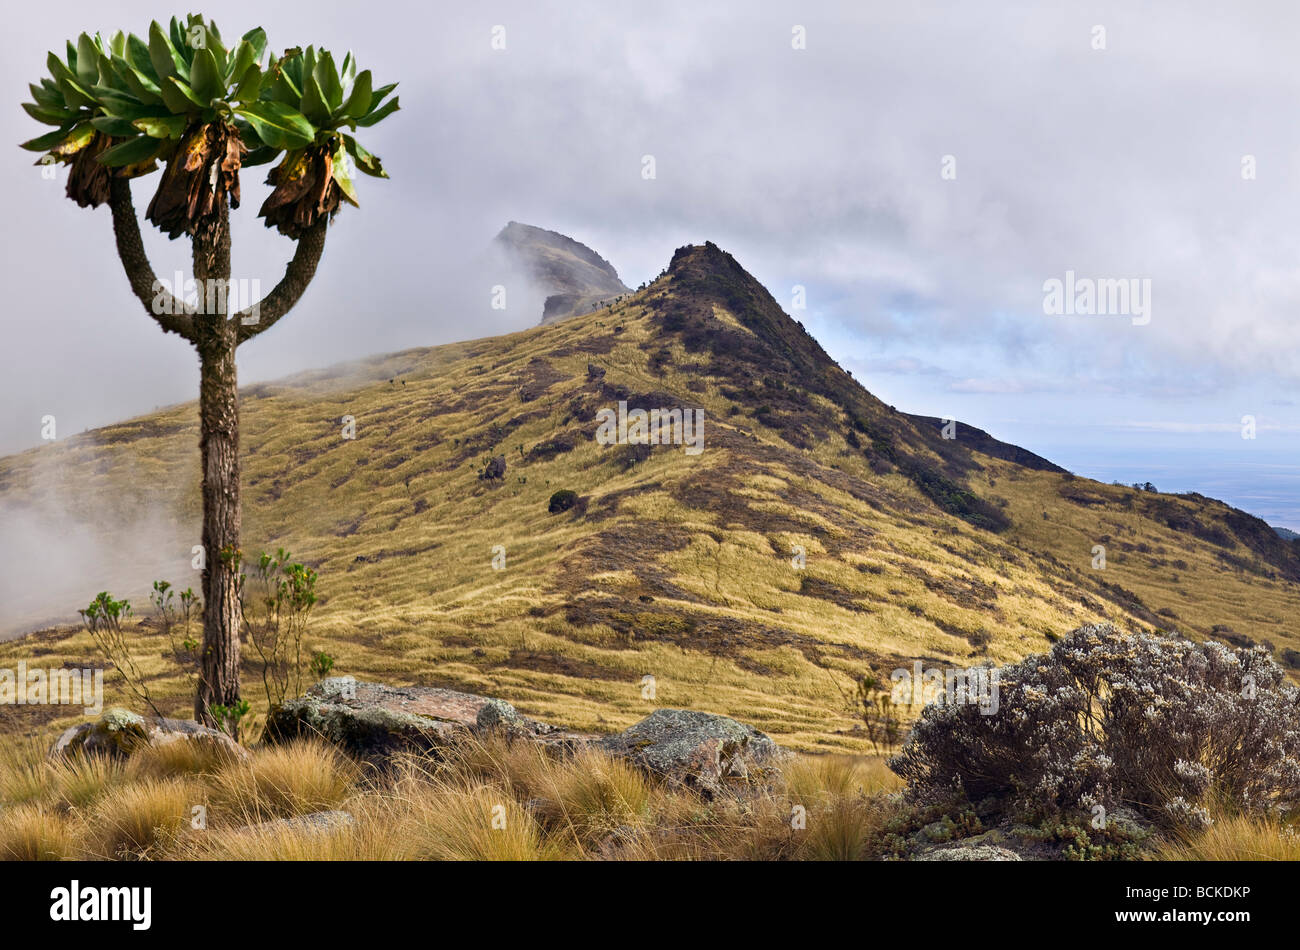 Kenya, Aberdares. Hardy moorland vegetation at 10,000 feet with a giant groundsel in the foreground. Stock Photo